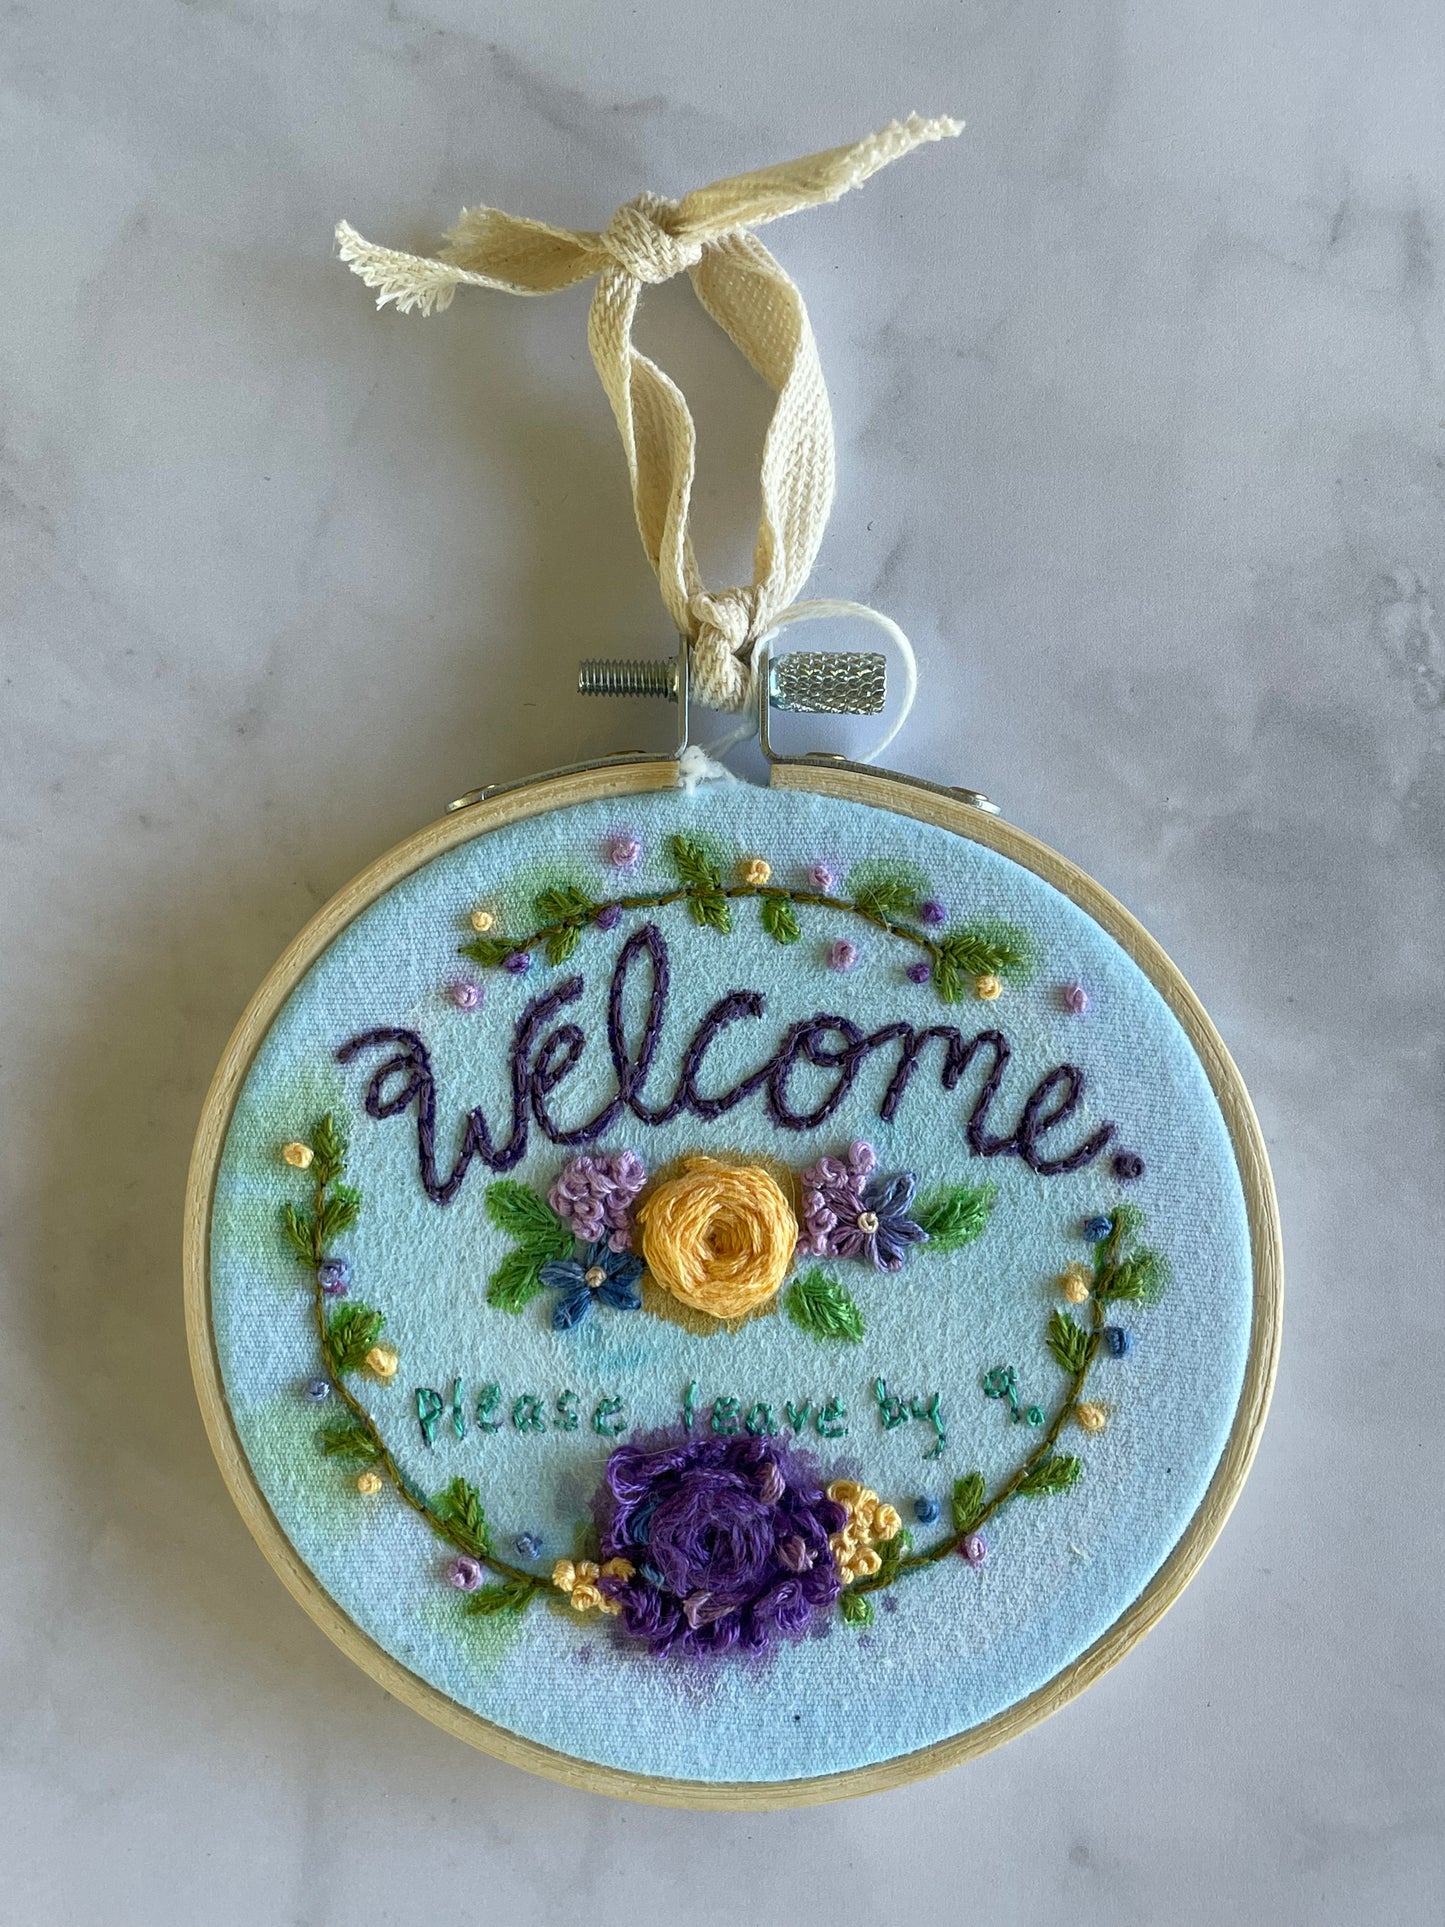 Welcome! Please Leave by 9 4” Embroidery